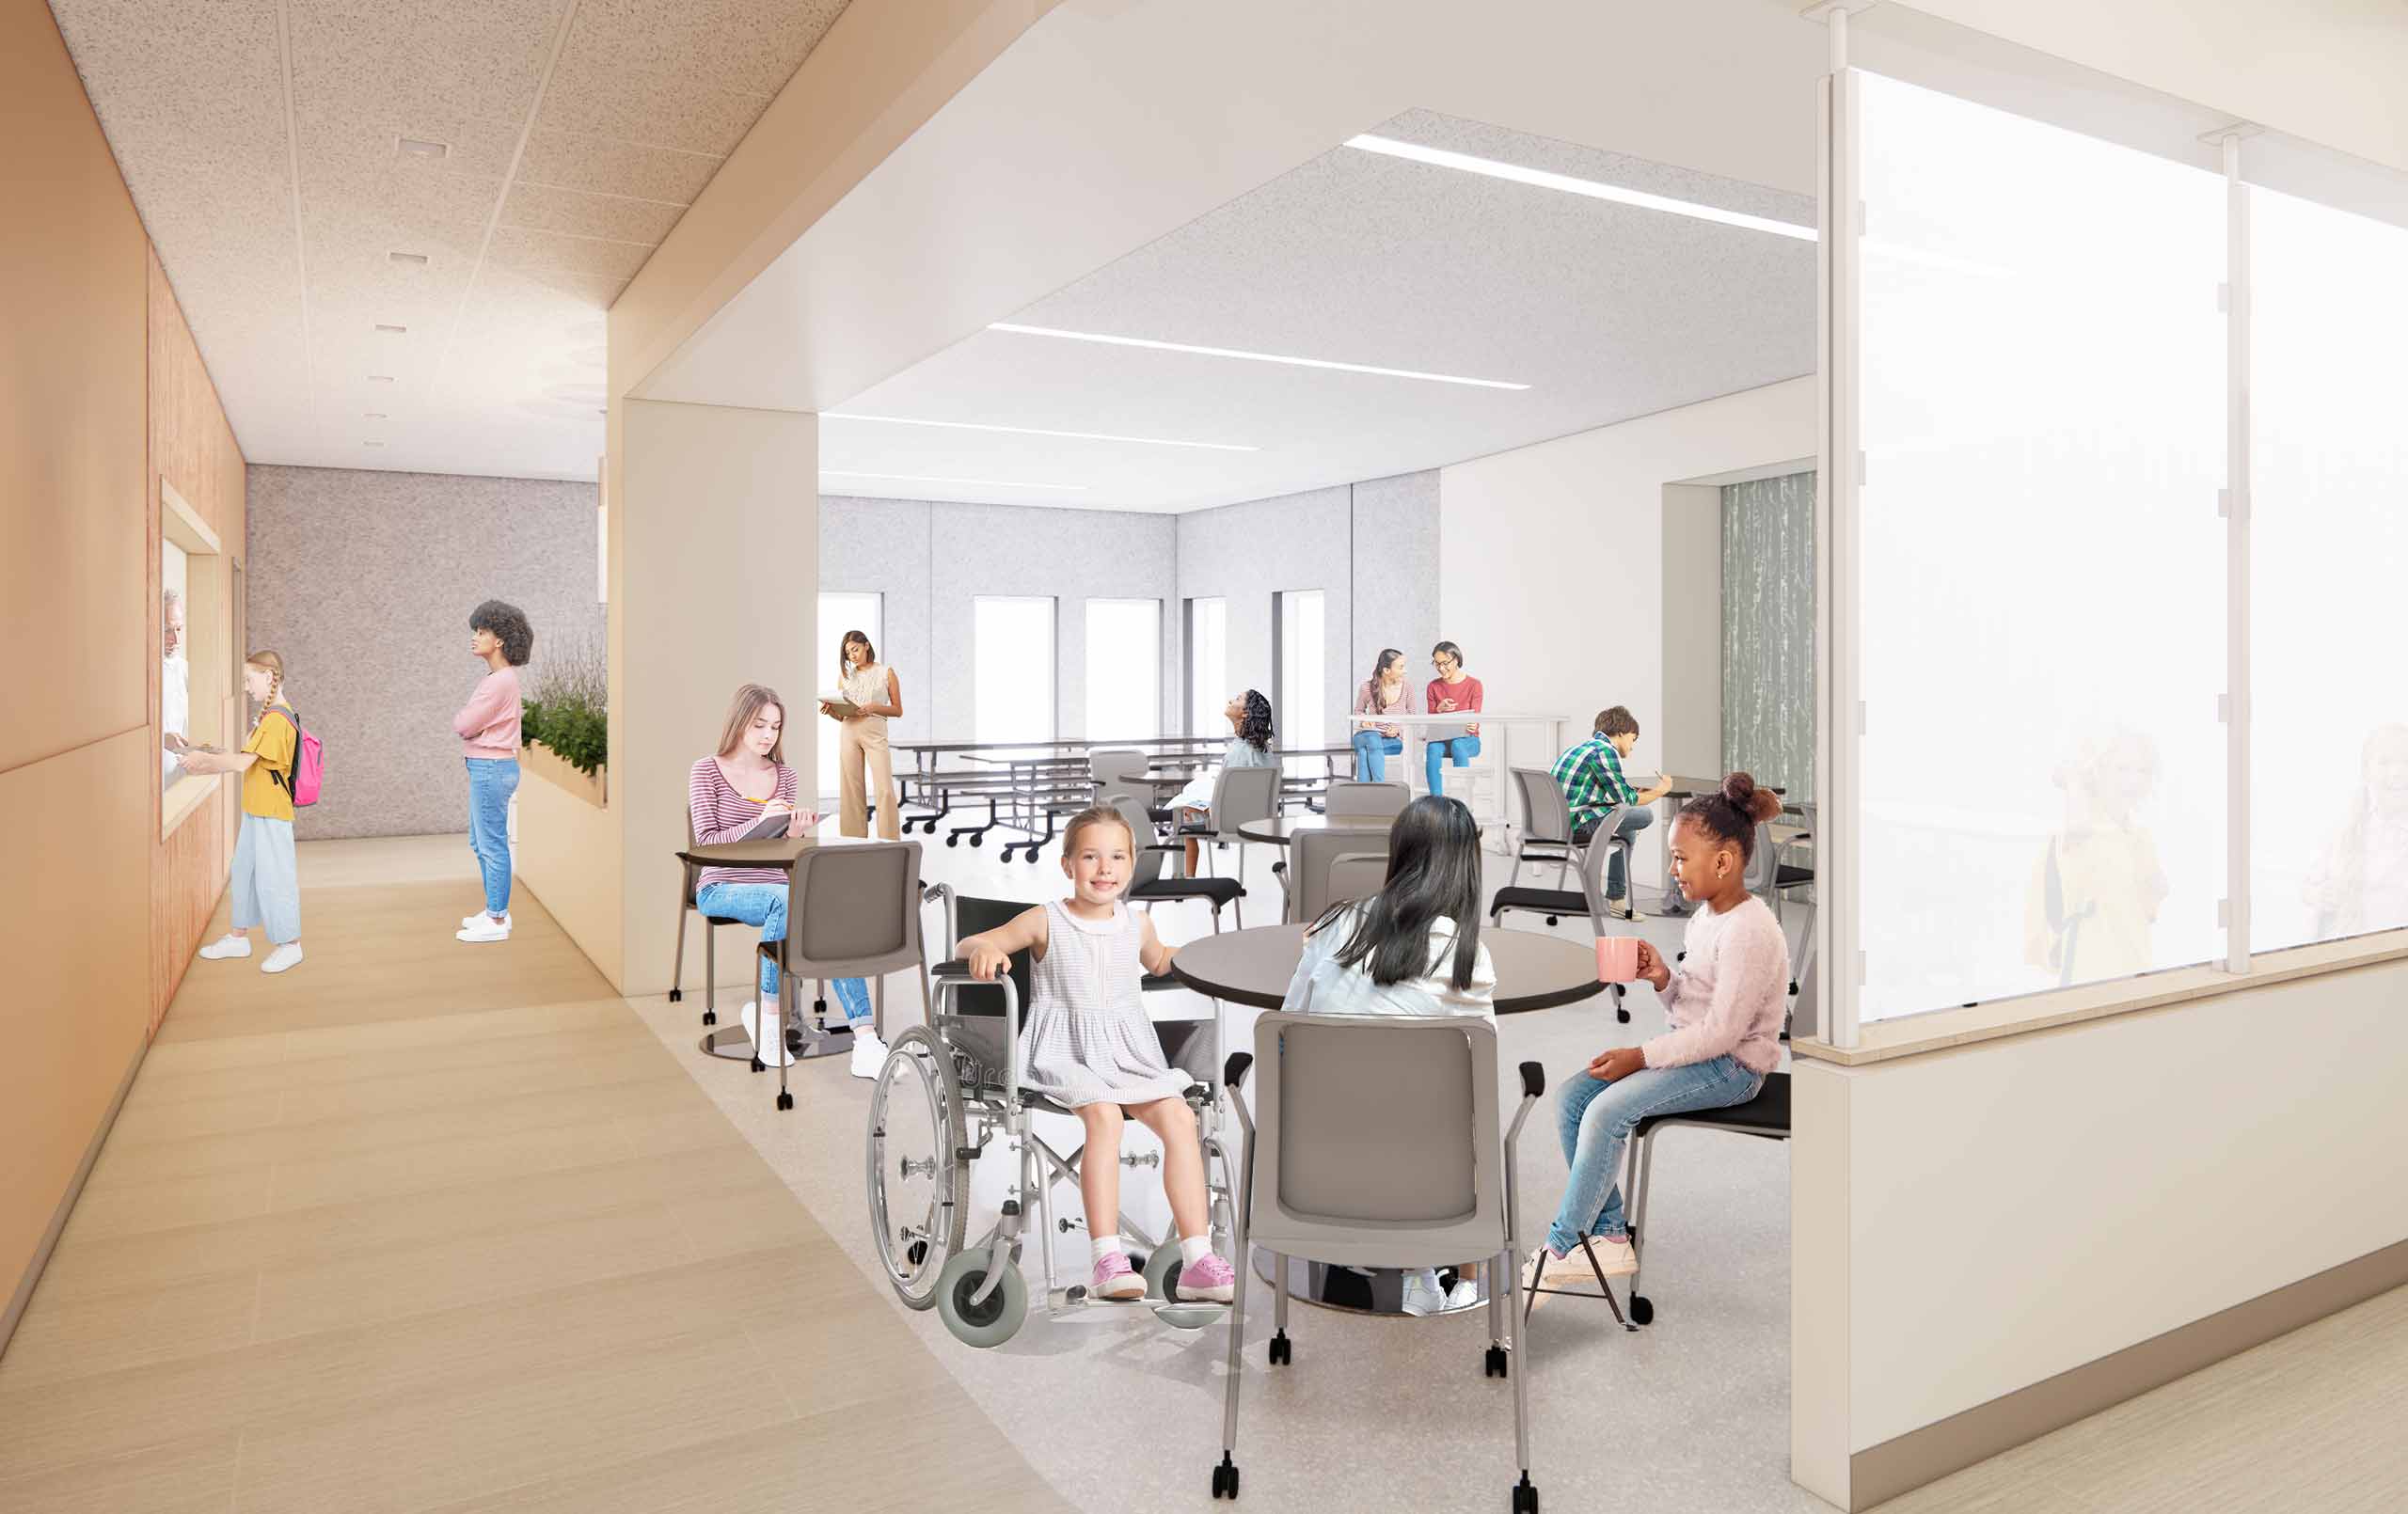 Rendering of A.E.R.O. Therapeutic Center cafeteria with students